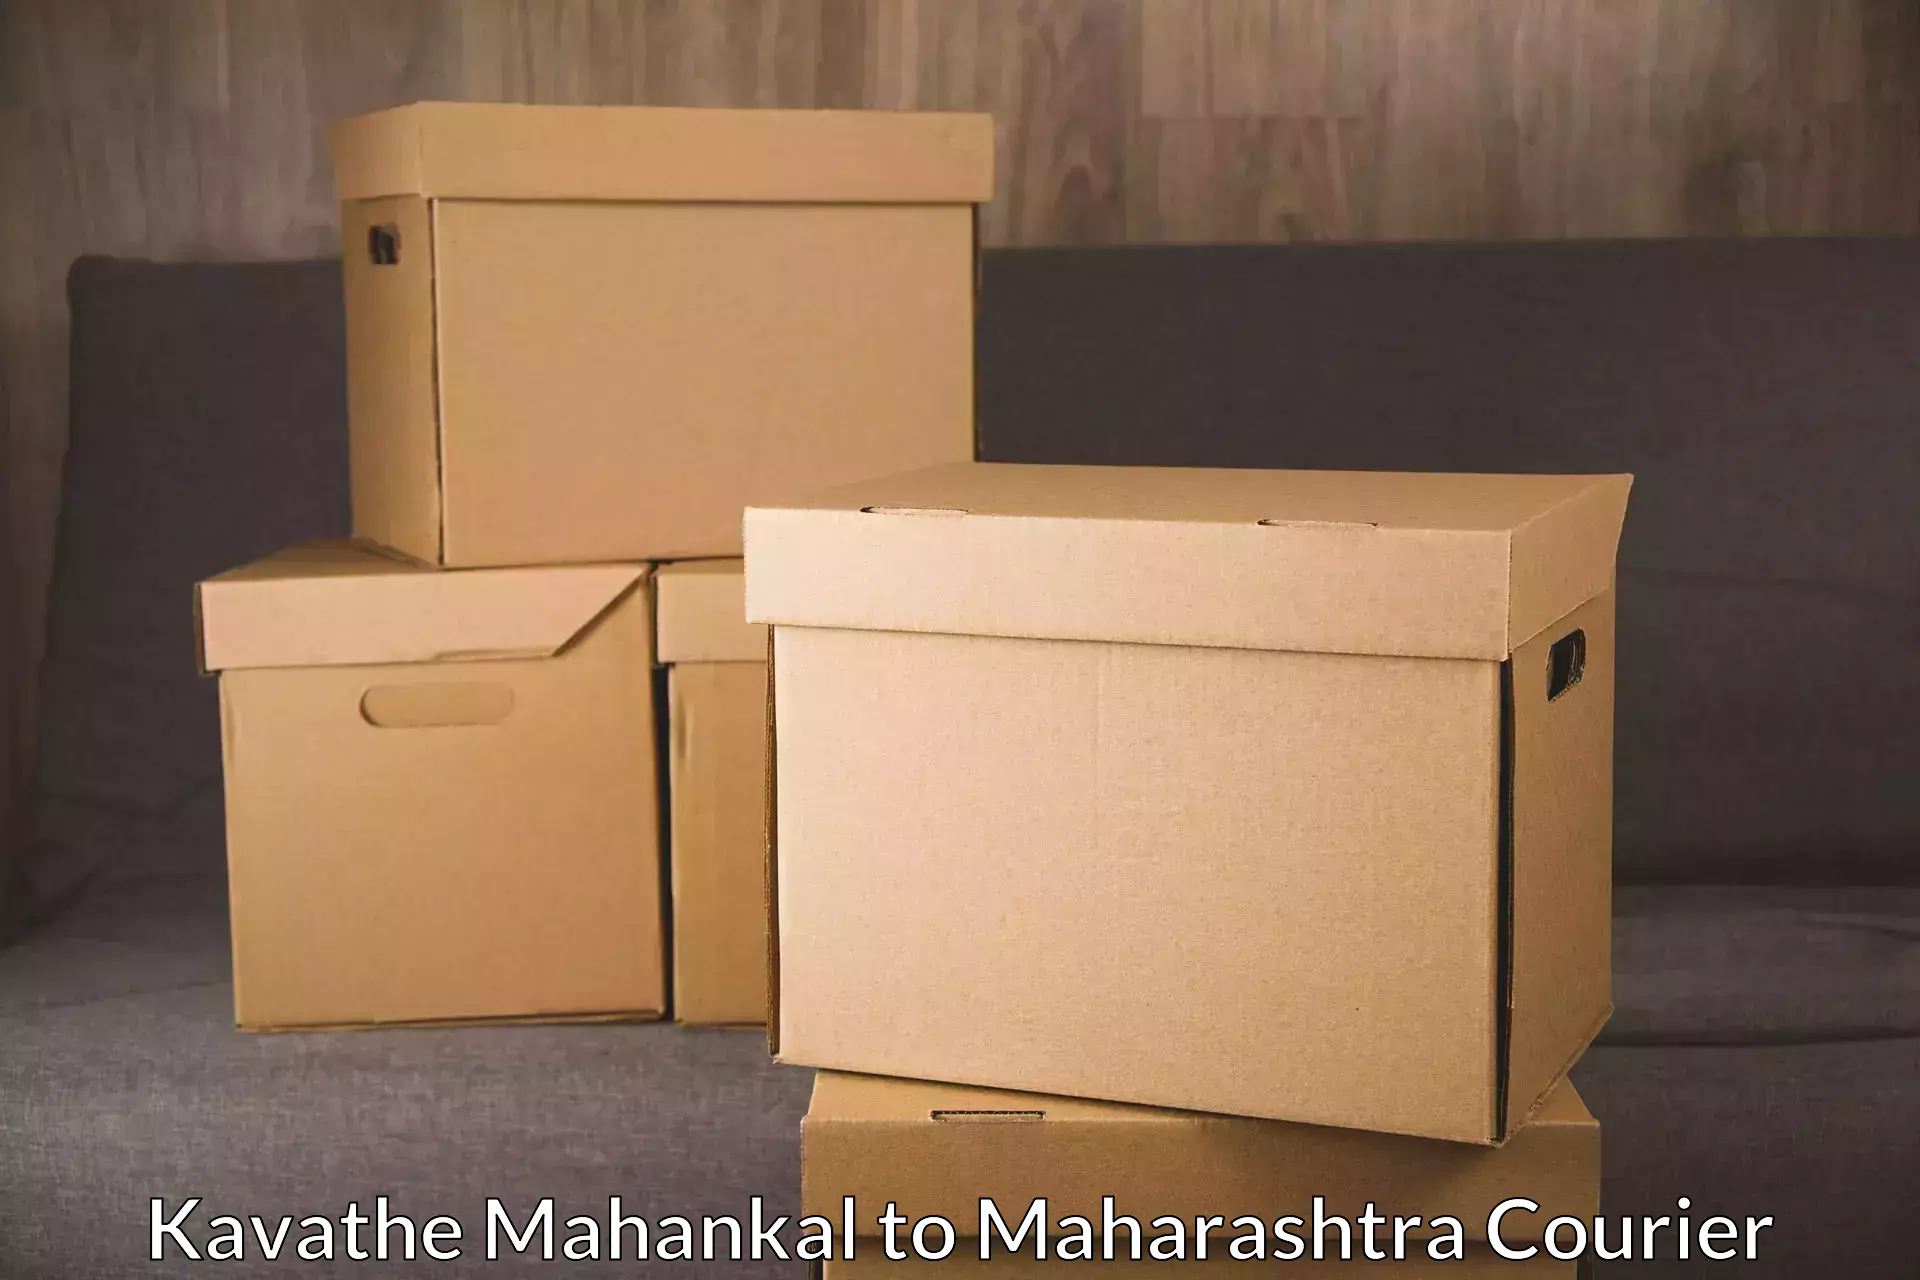 Courier service comparison in Kavathe Mahankal to Ahmedpur